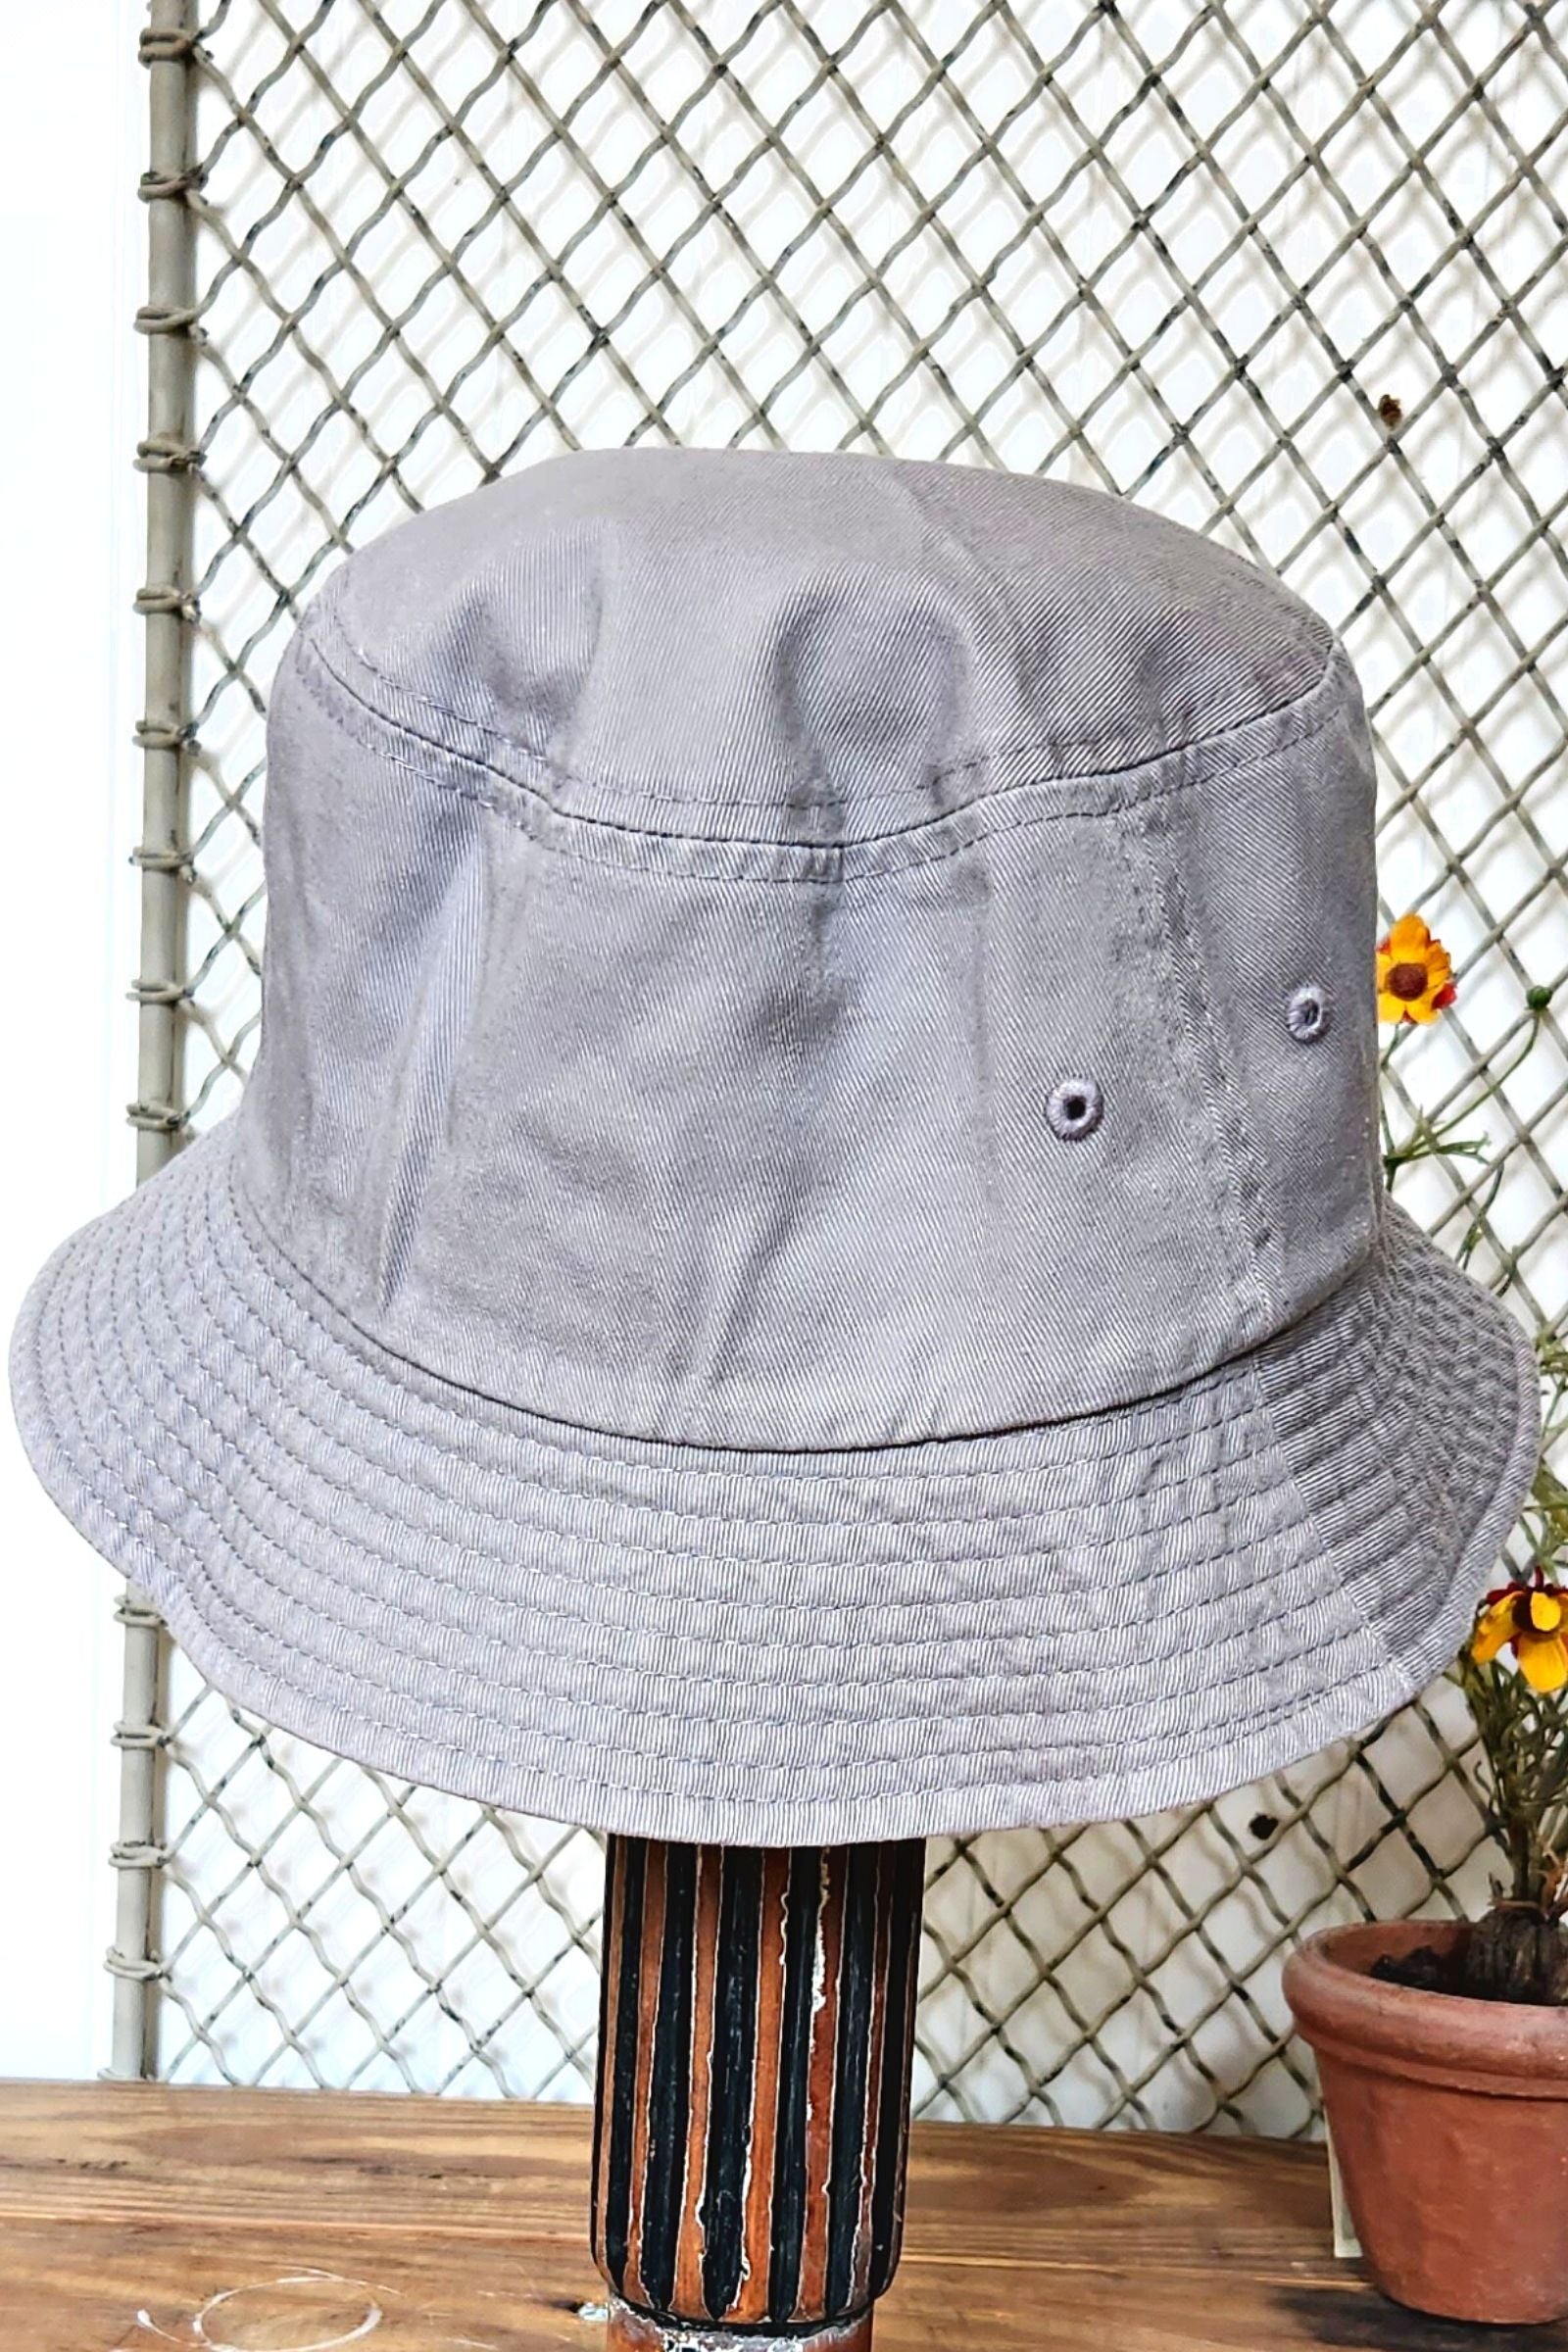 Weston Swoop Tag Bucket Hat - TWO Colors!